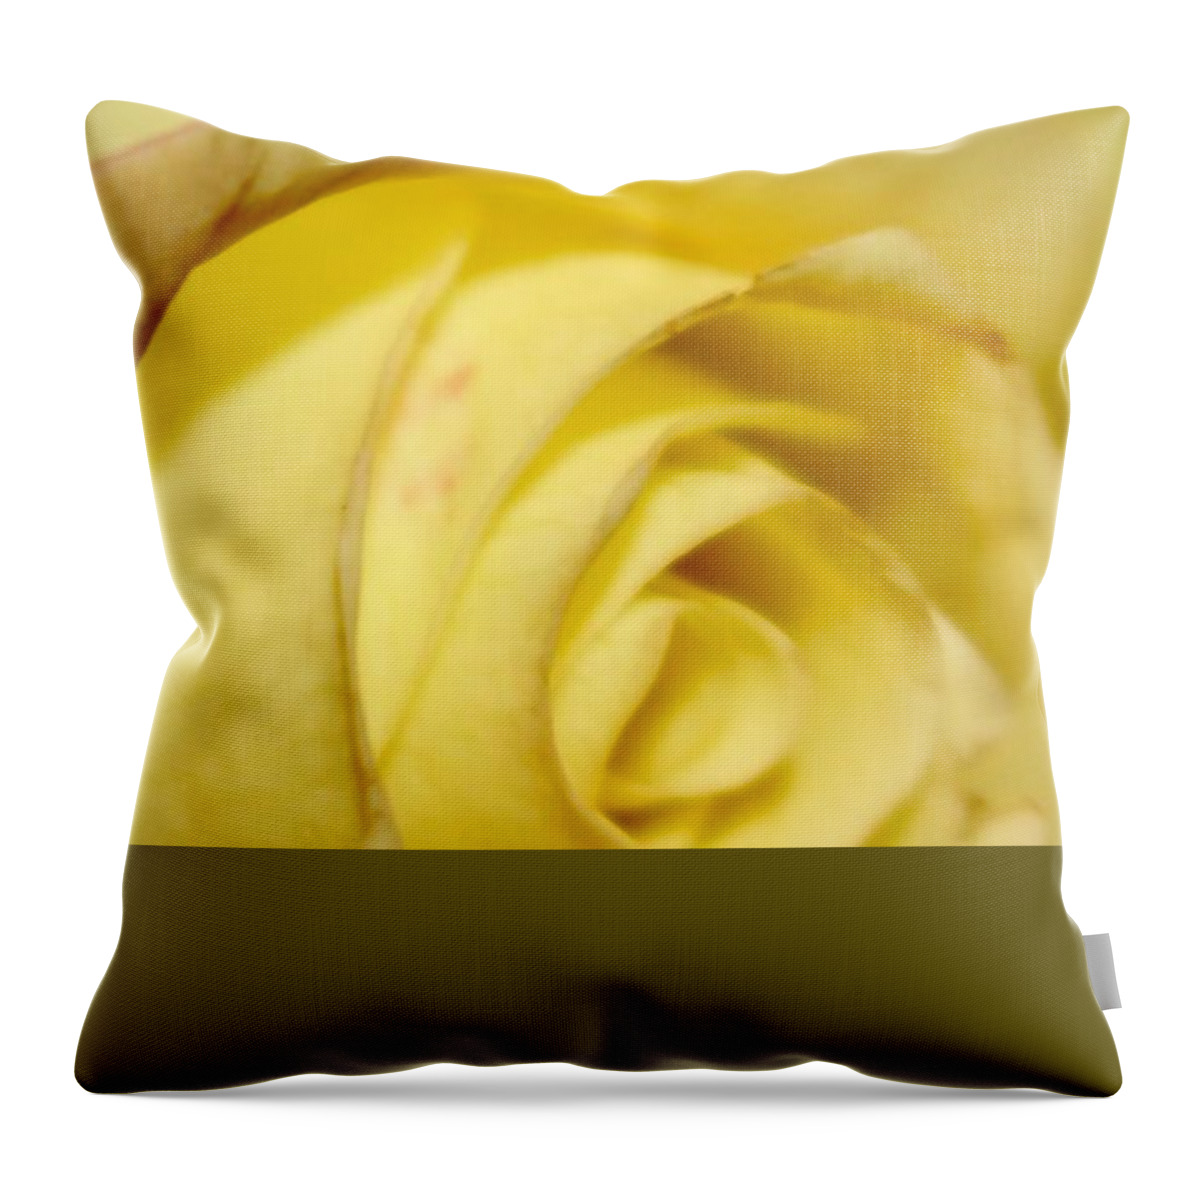 Yellow Rose Throw Pillow featuring the photograph Rose by Deena Withycombe